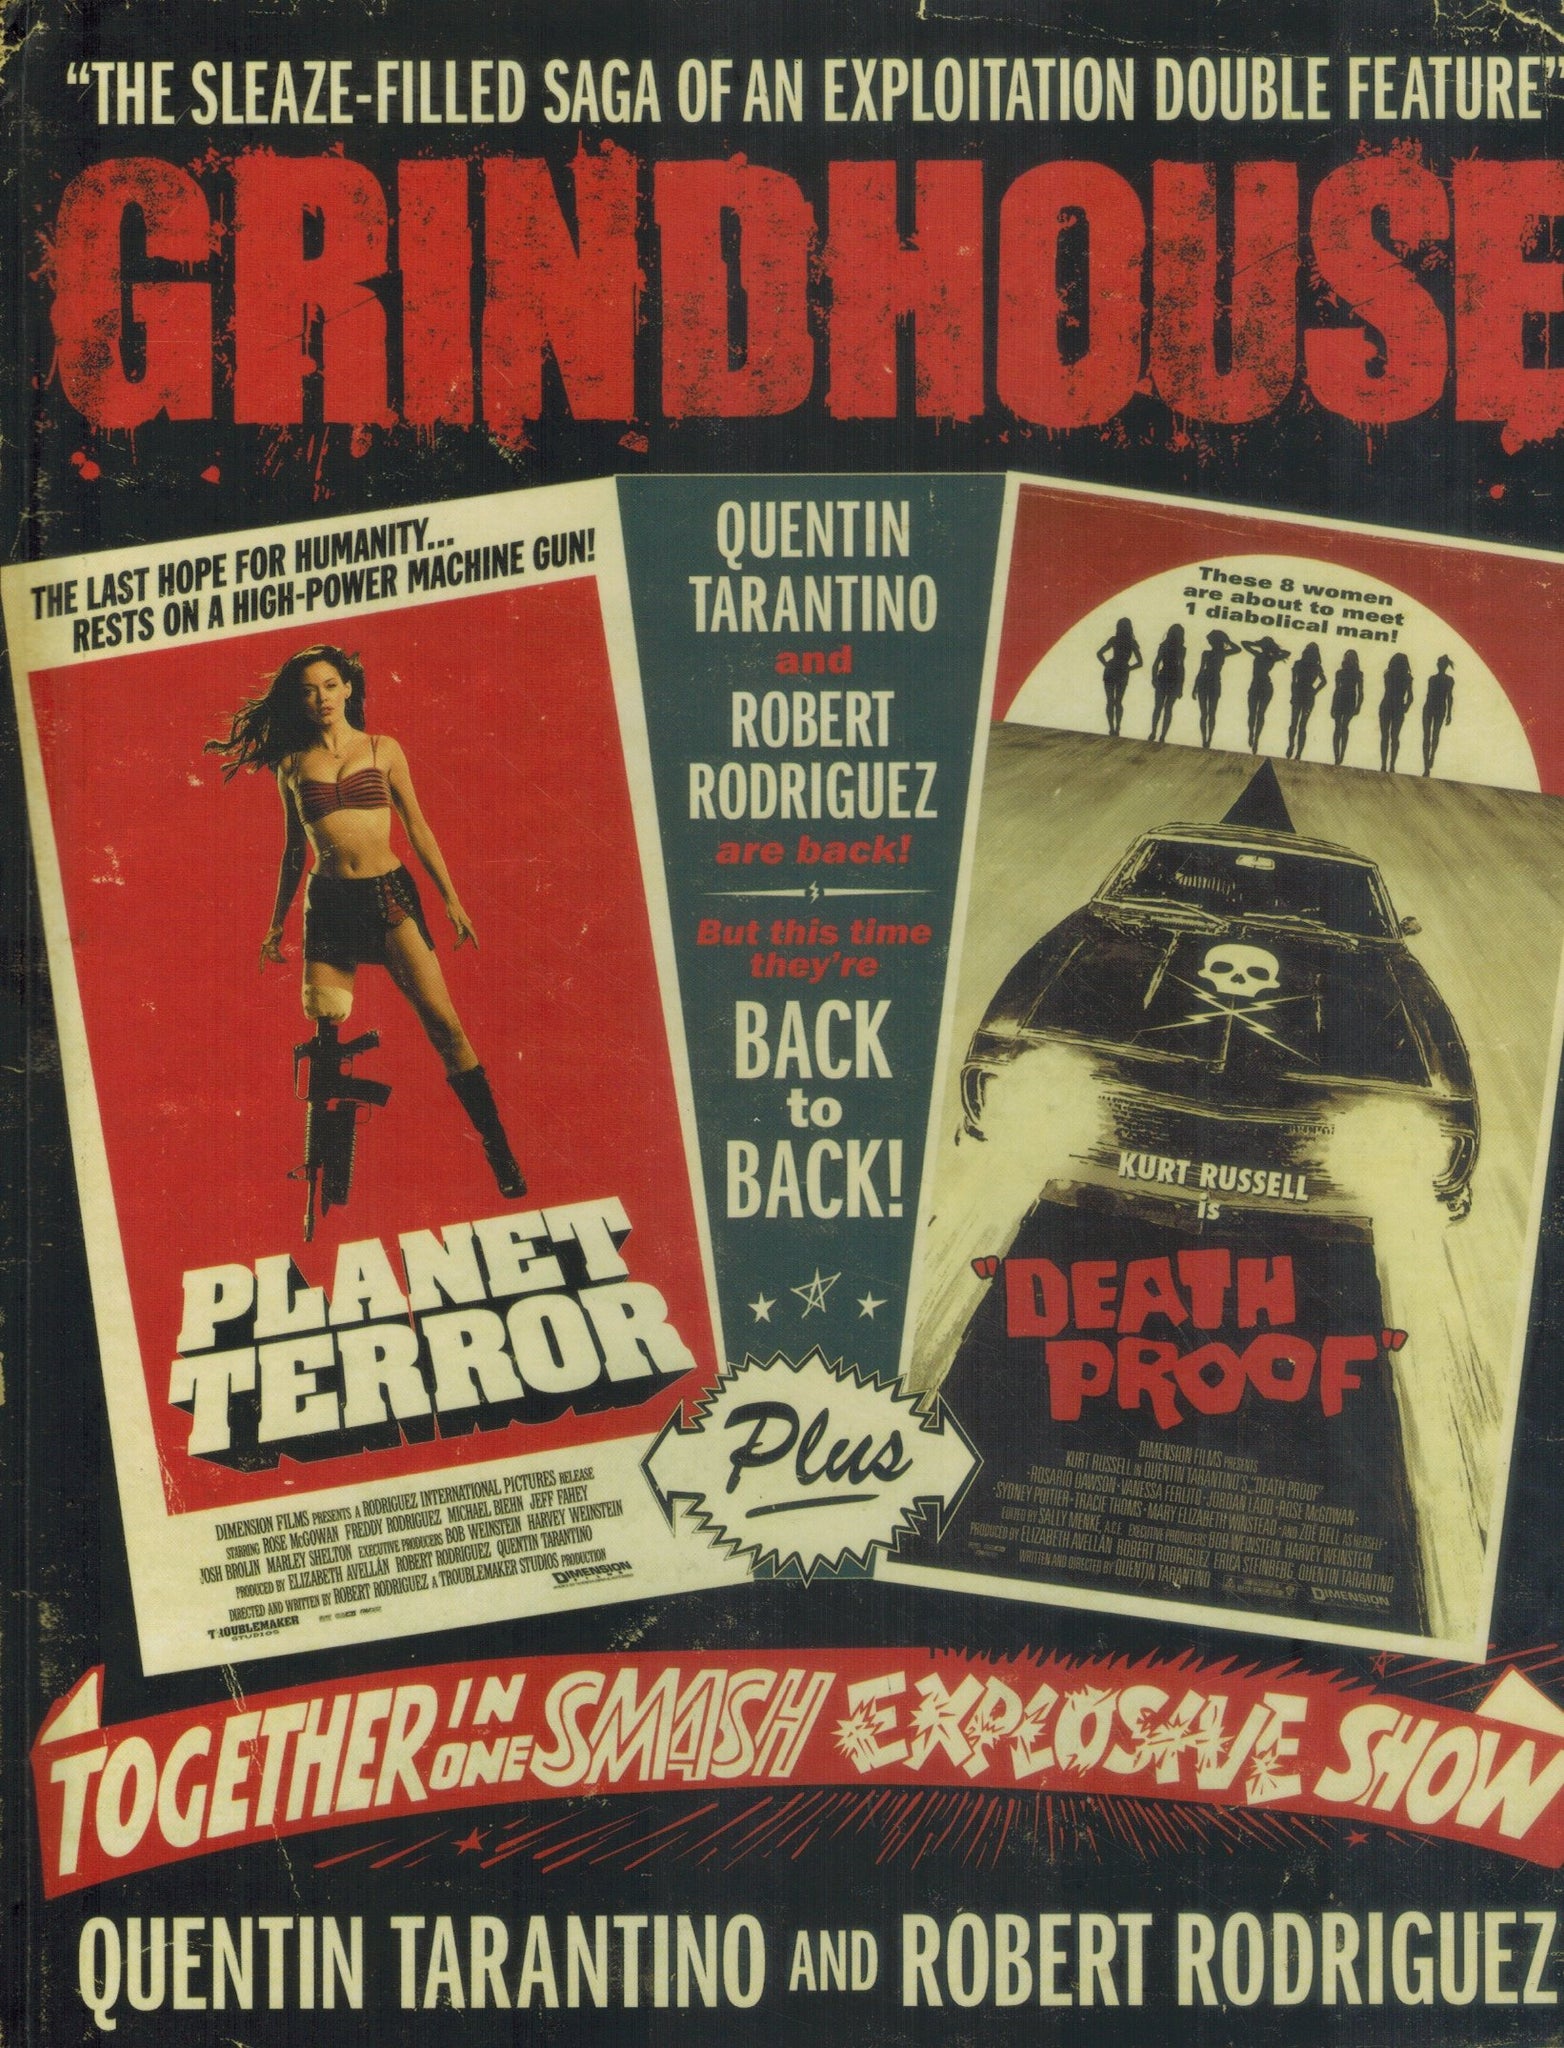 Grindhouse  The Sleaze-filled Saga of an Exploitation Double Feature  by Tarantino, Quentin &  Robert Rodriguez